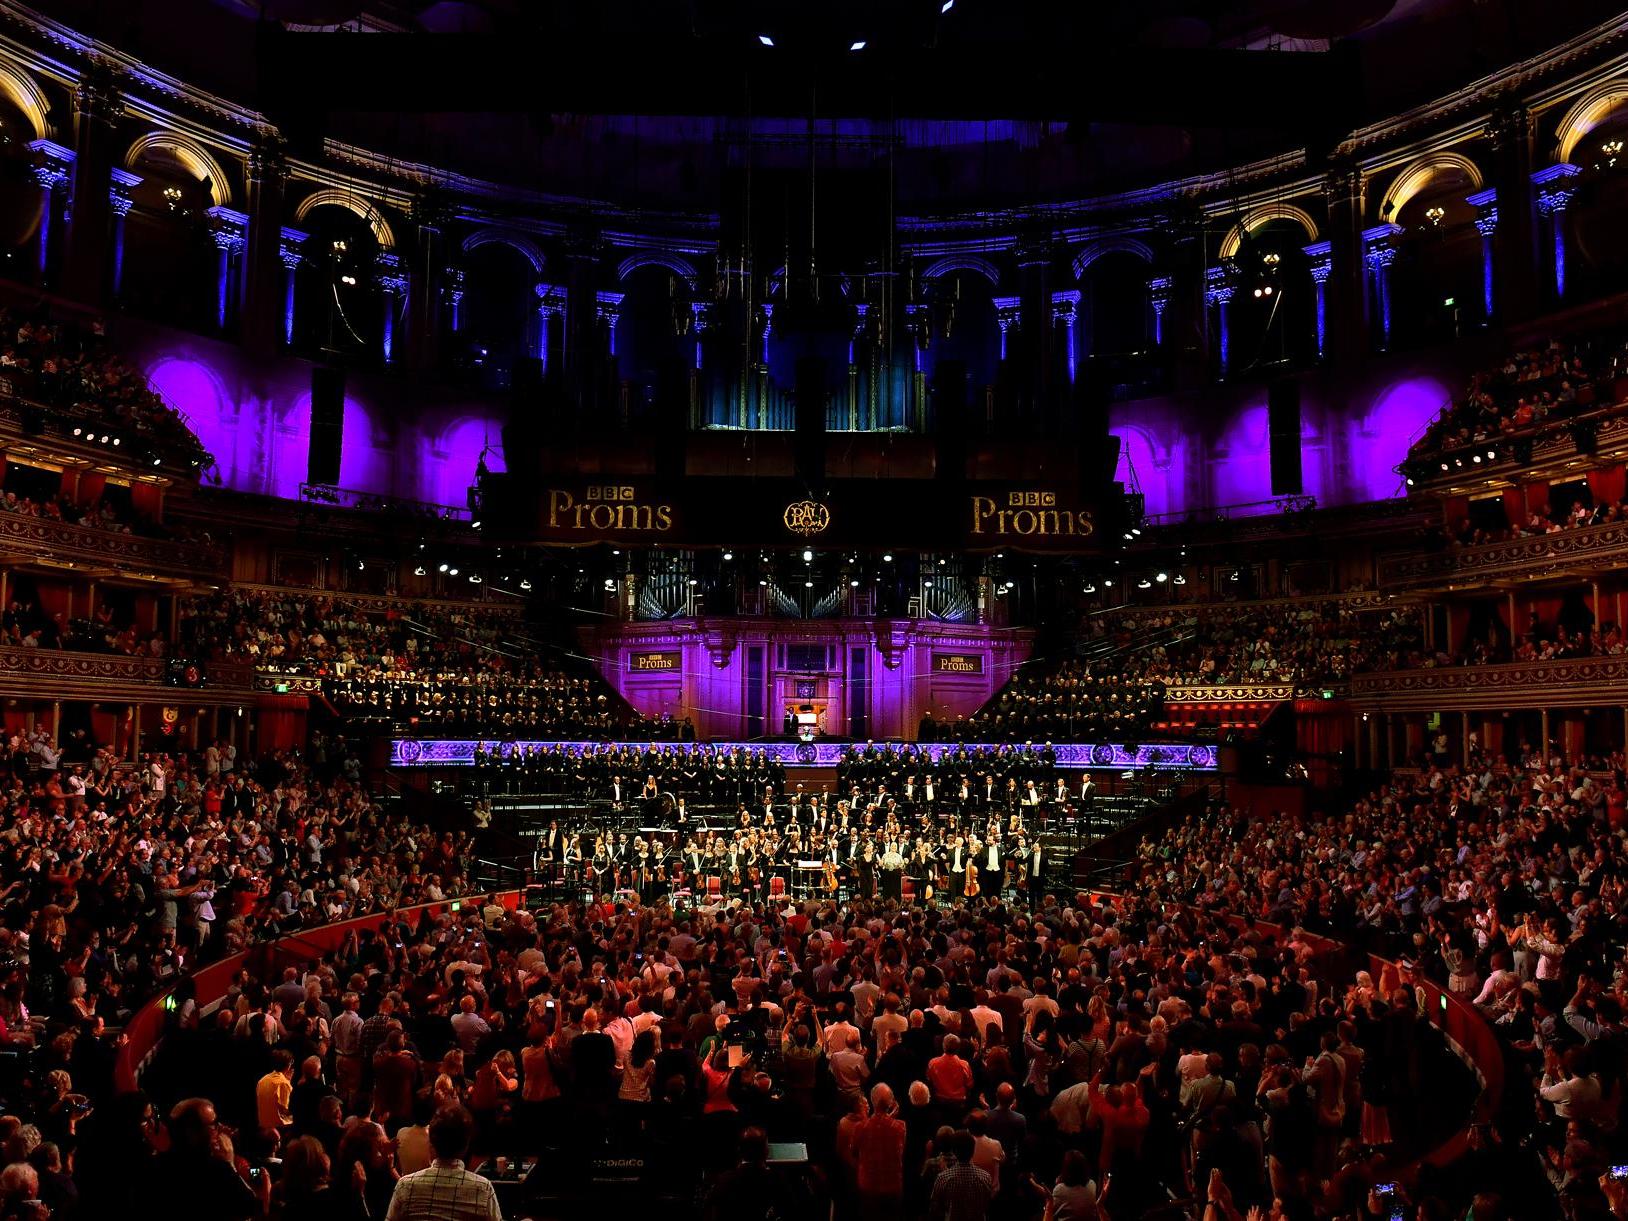 The BBC Singers and BBC Symphony Chorus perform at the Royal Albert Hall